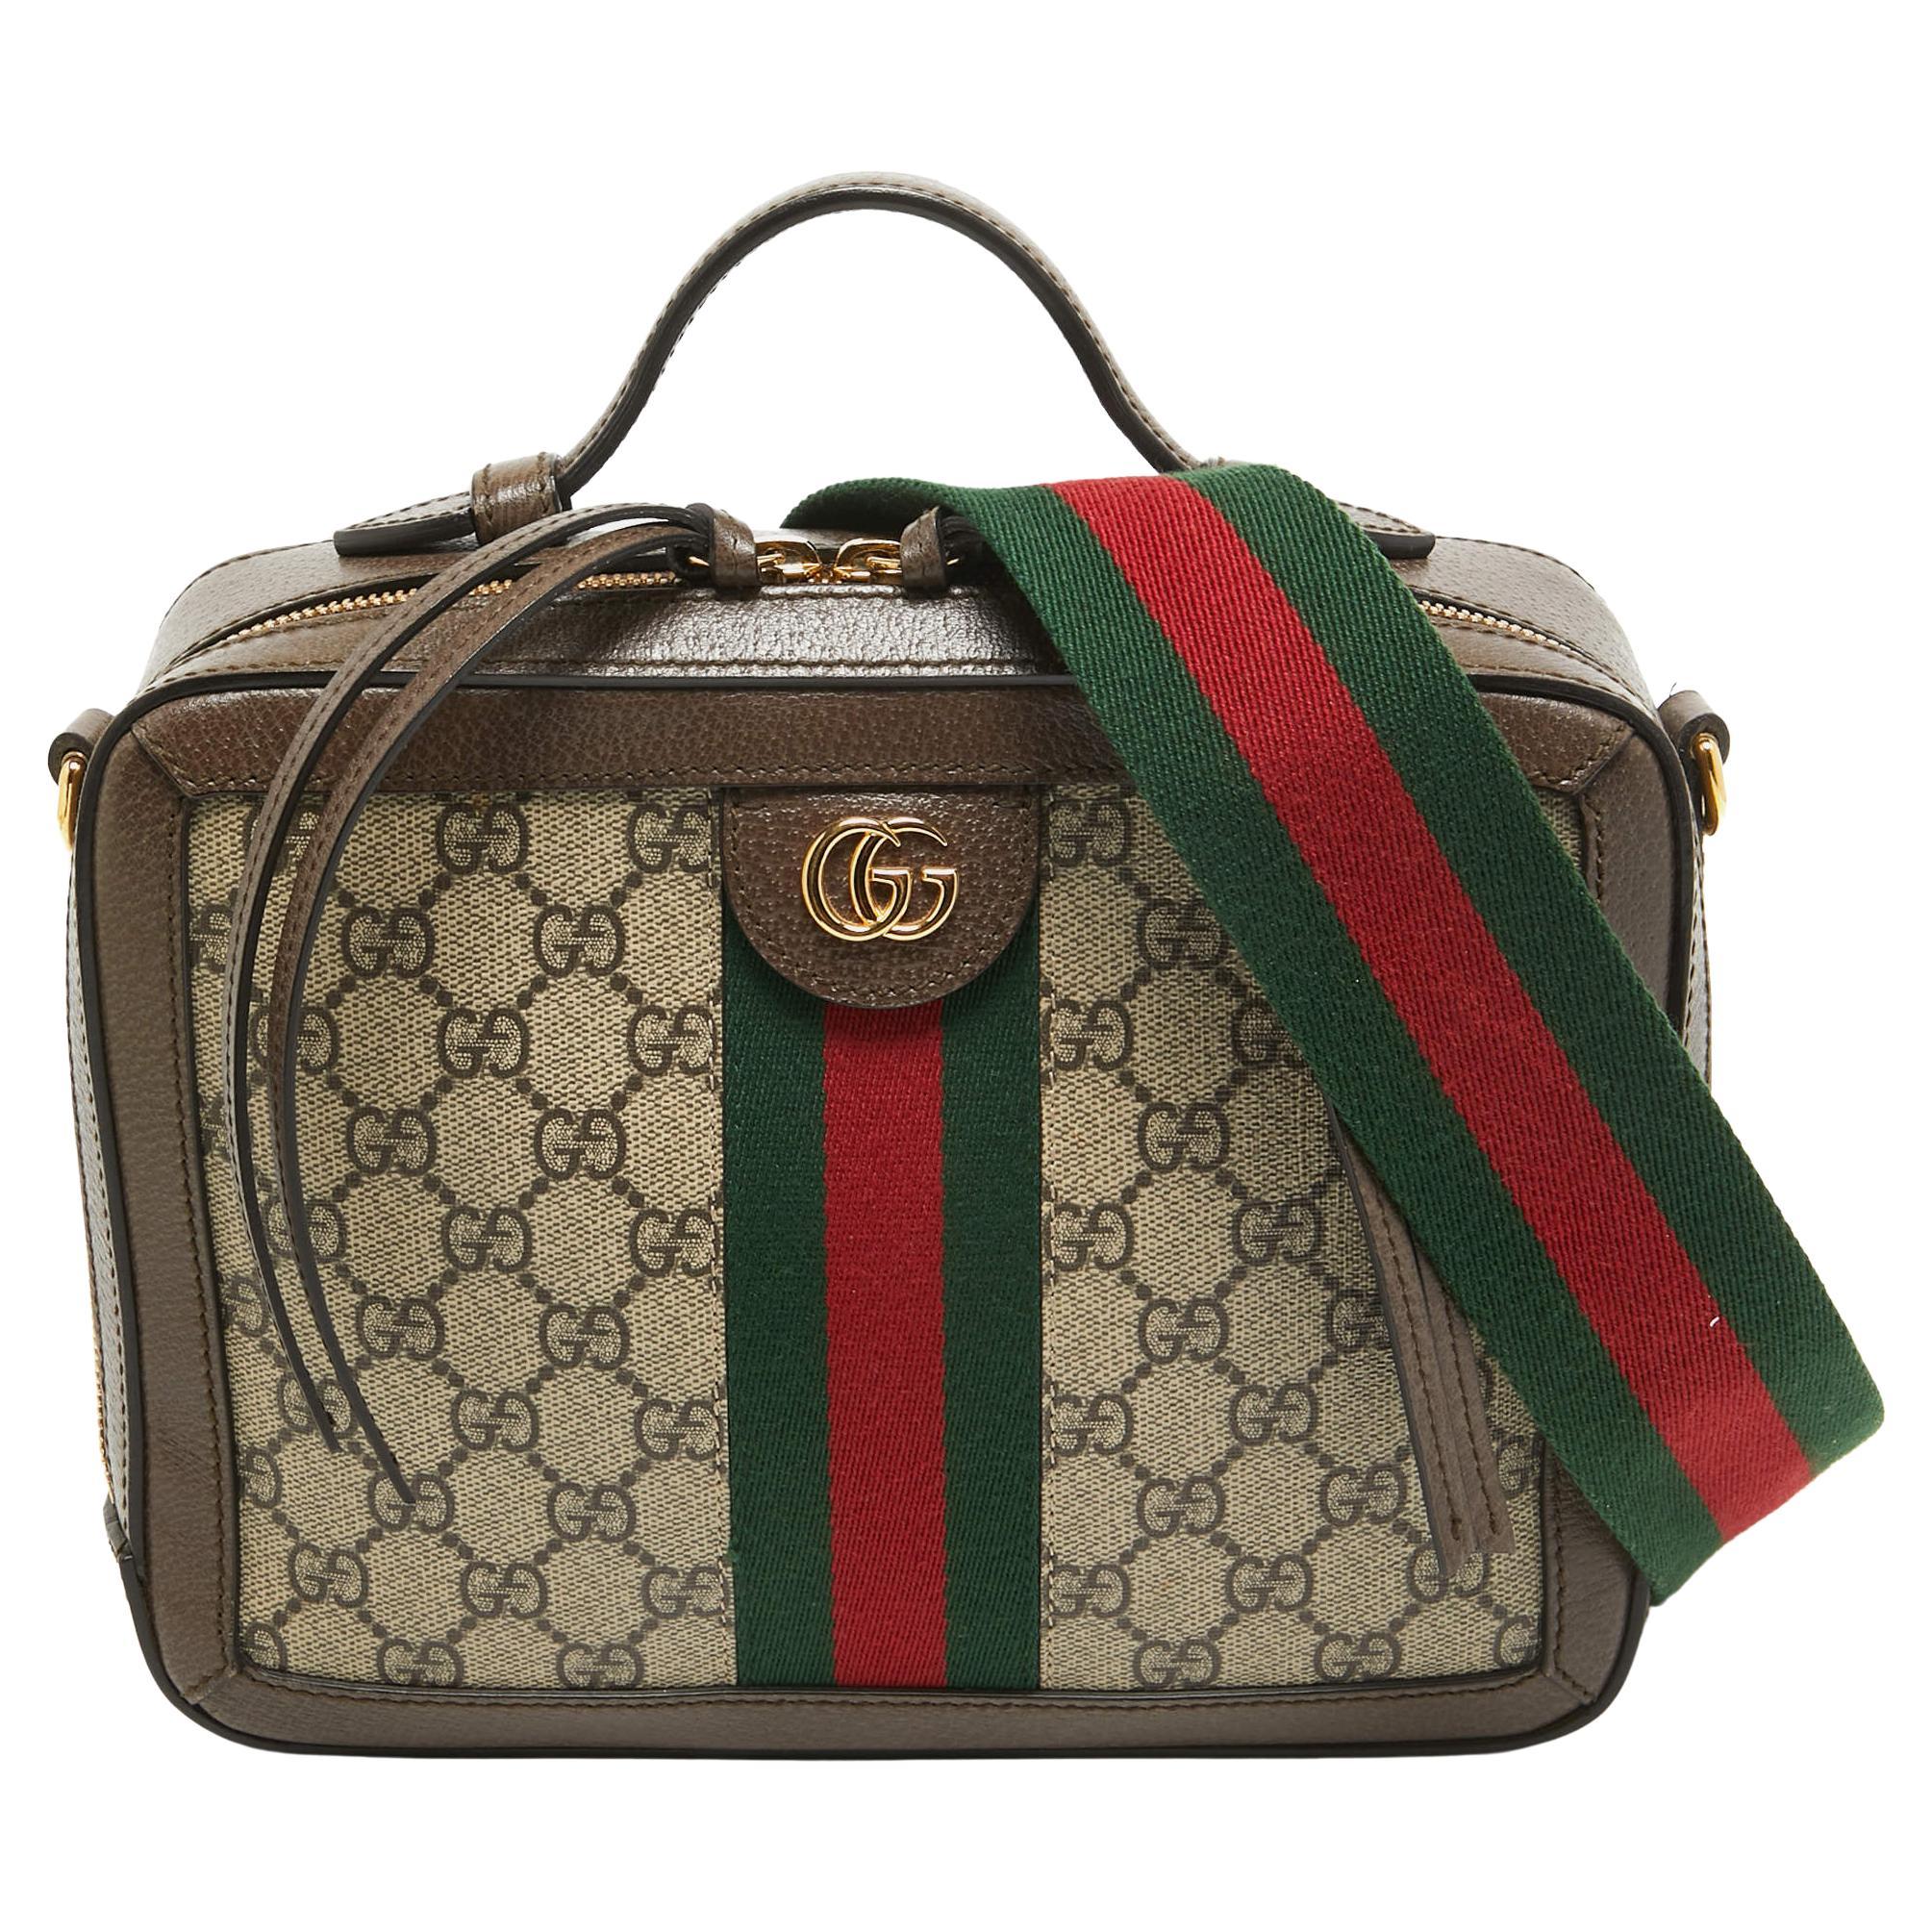 Gucci Beige/Ebony GG Supreme Canvas and Leather Small Ophidia Top Handle Bag